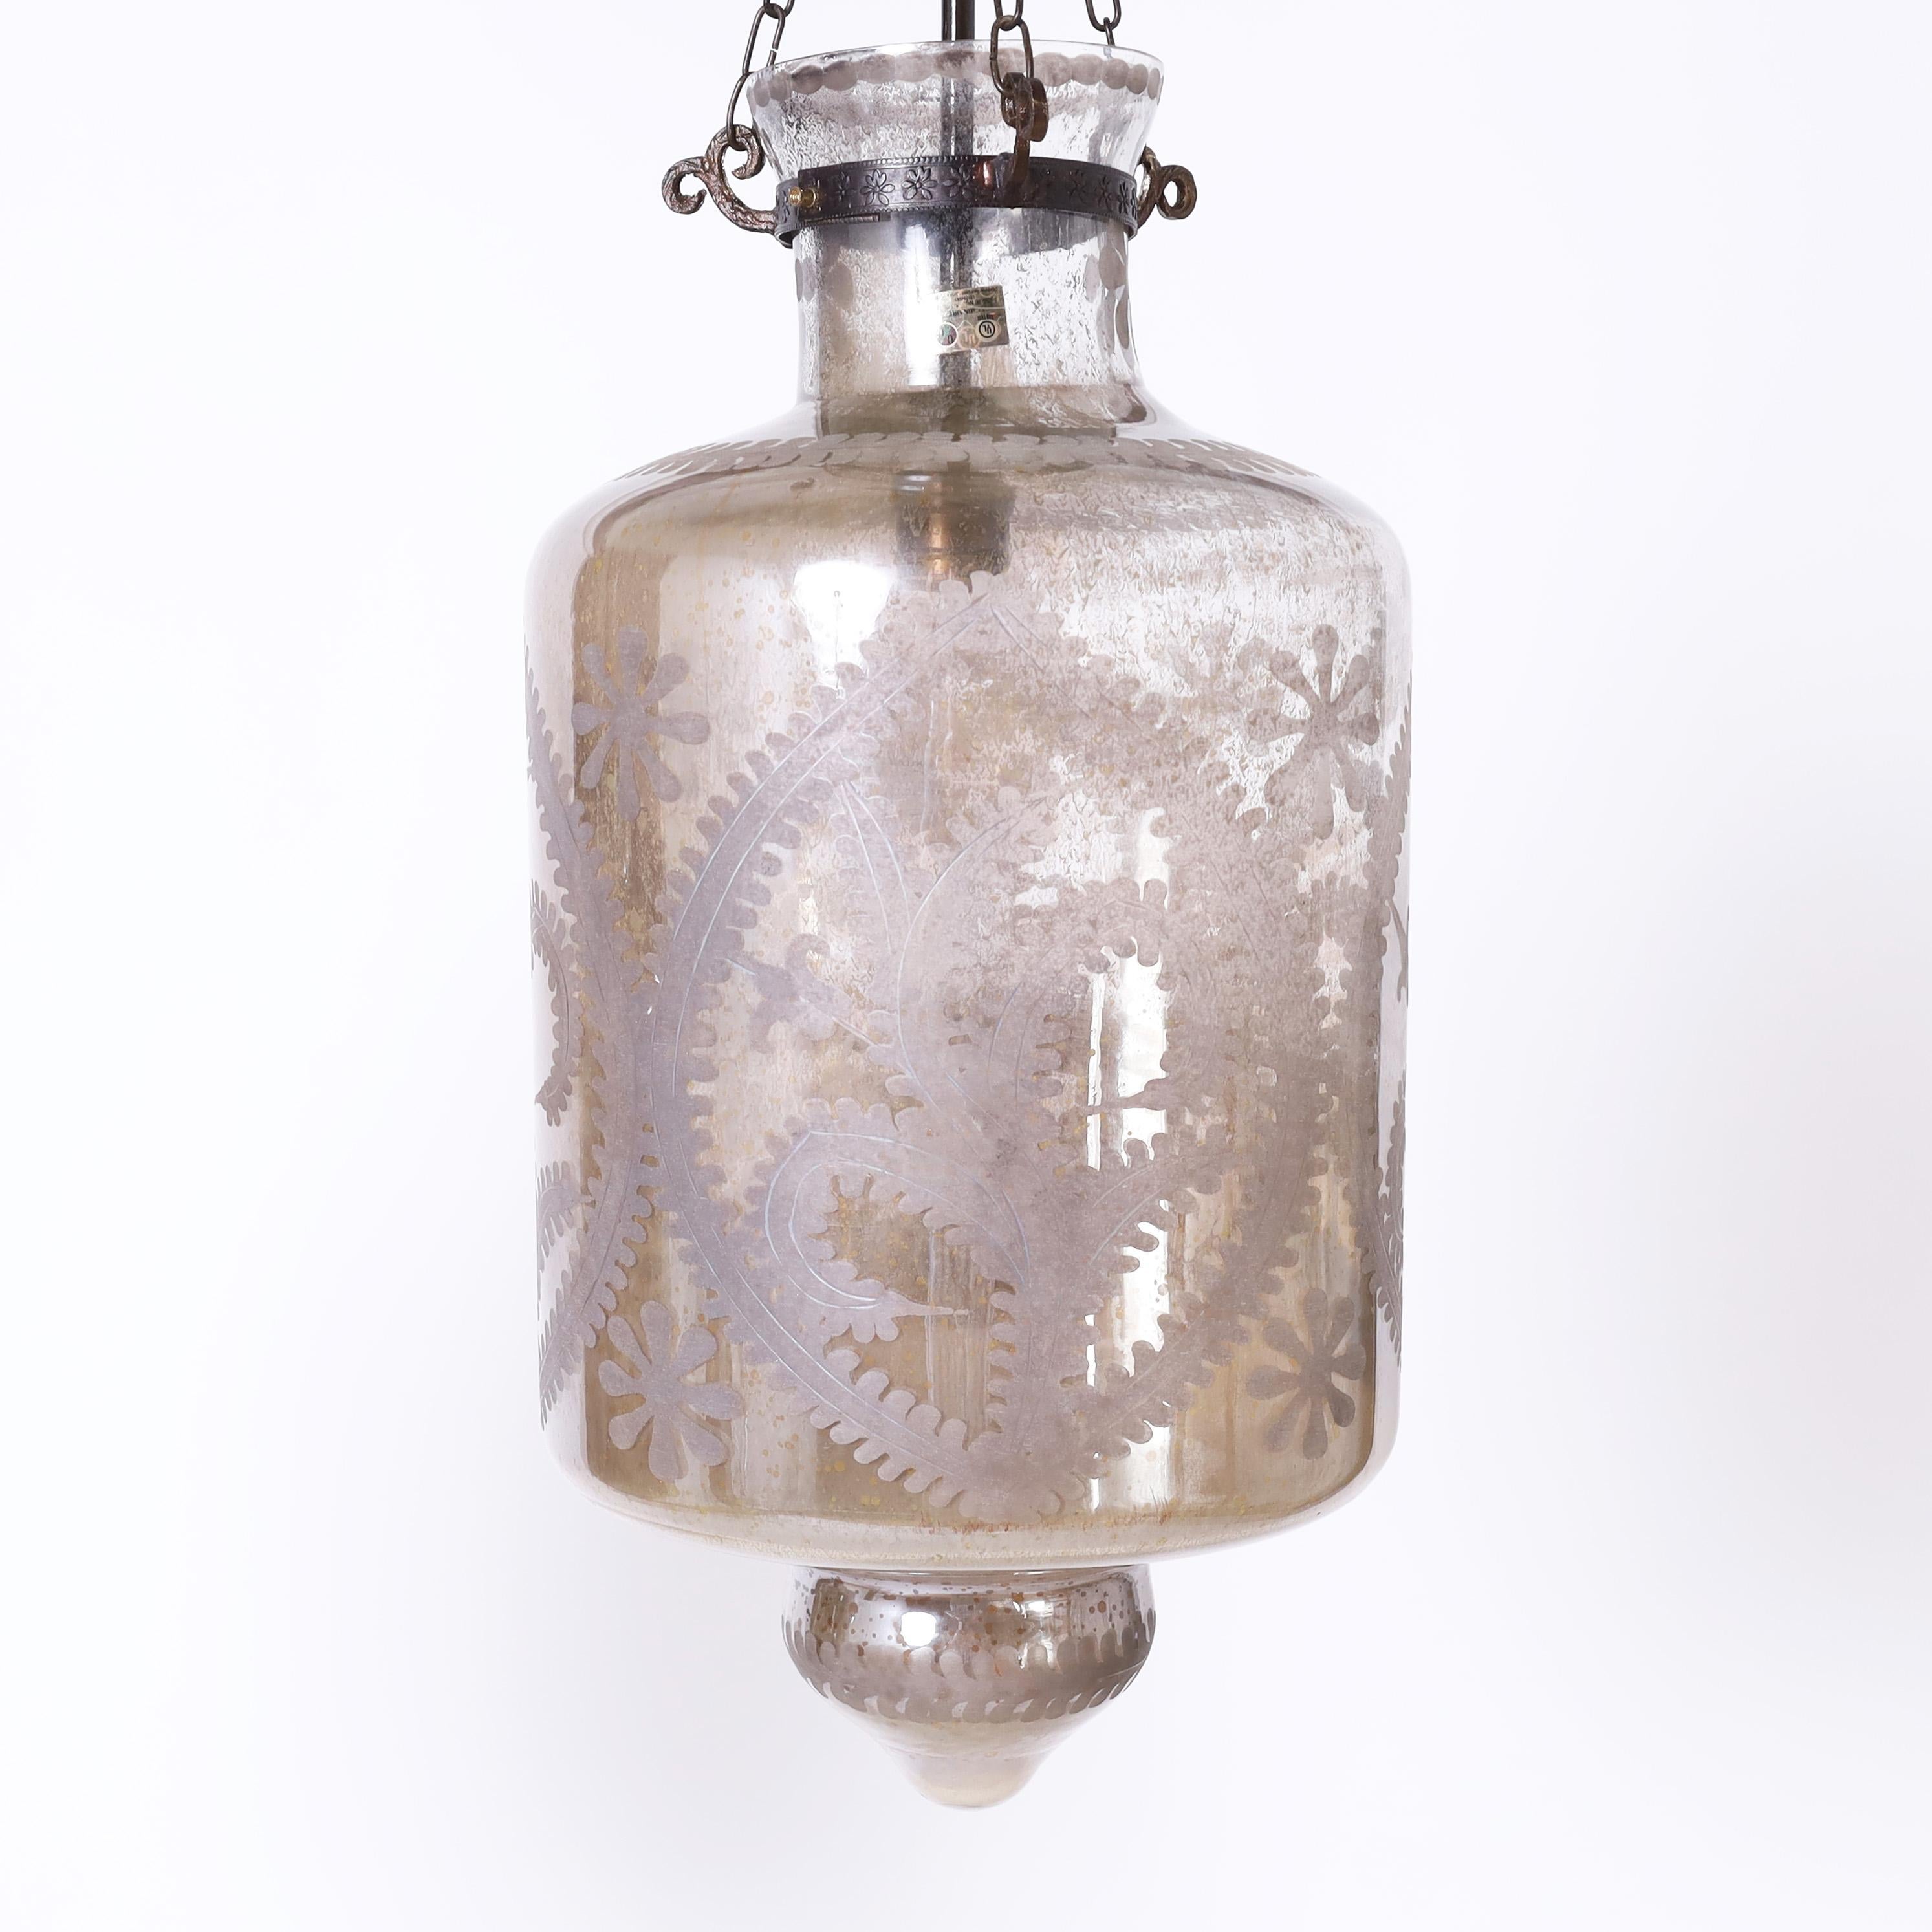 Indonesian Pair of British Colonial Style Etched Mercury Glass Lanterns or Light Fixtures For Sale